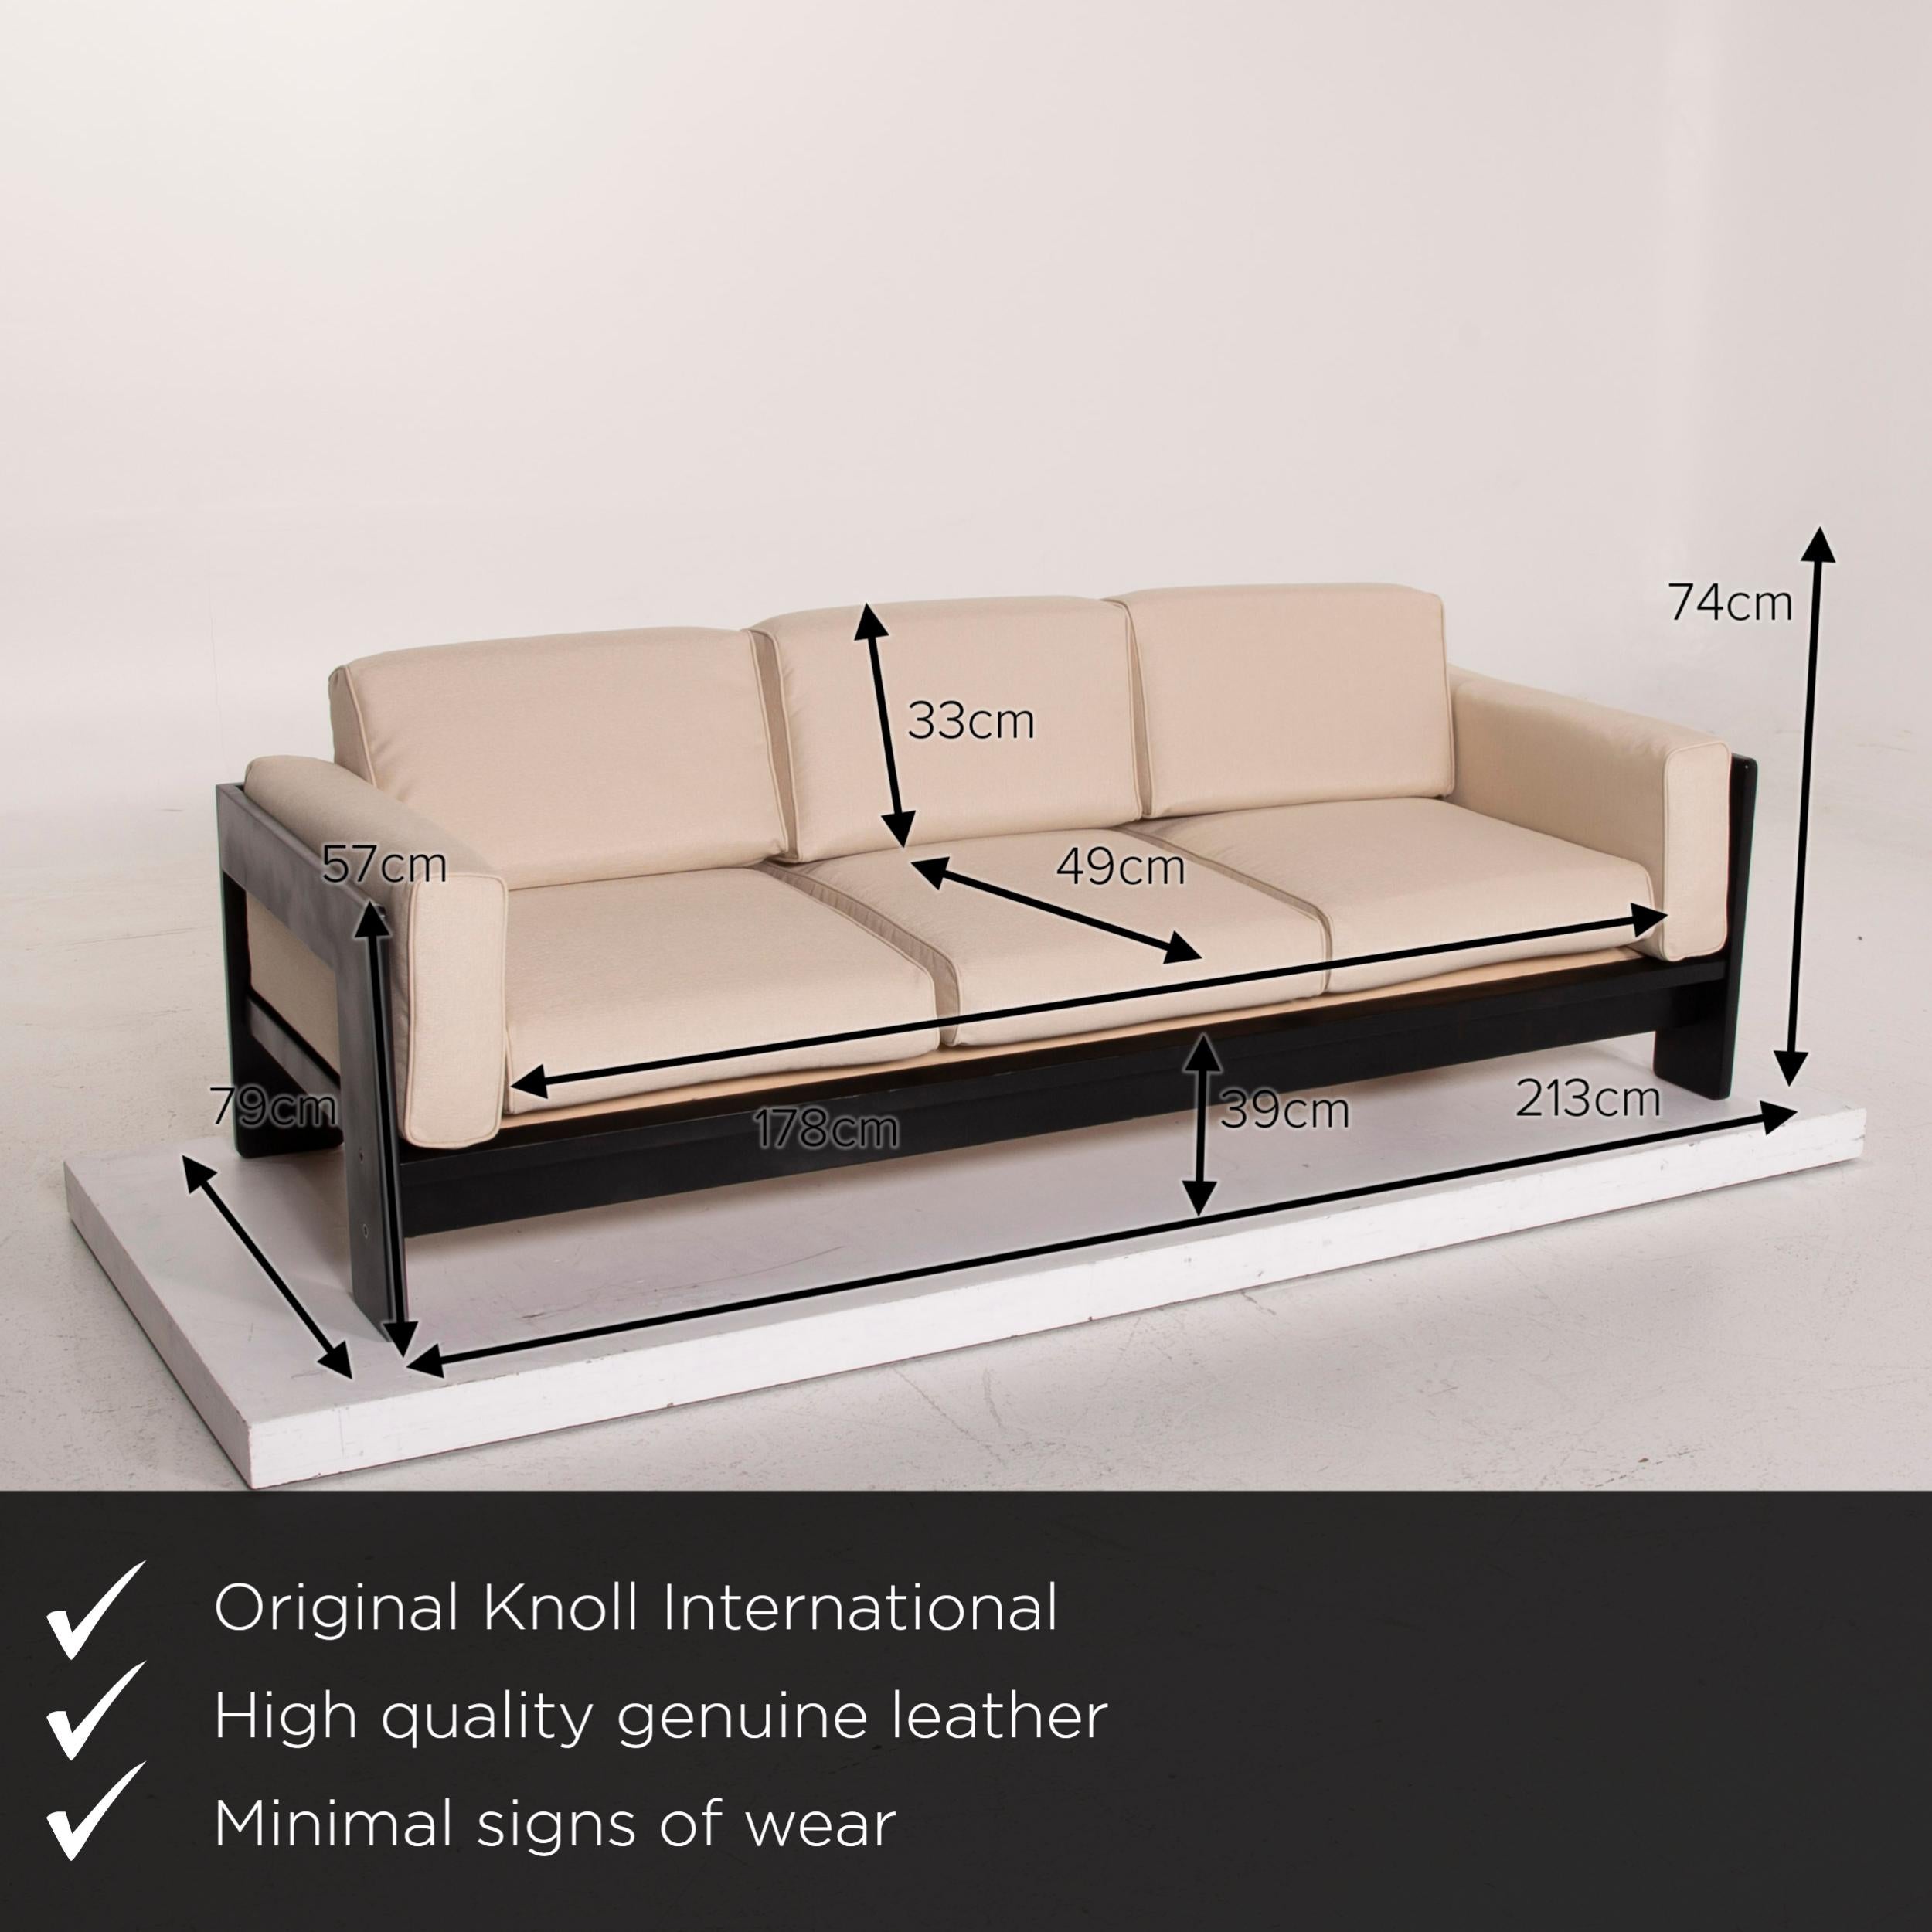 We present to you a Knoll International Bastiano fabric sofa set cream 1x three-seater 1x.
 

 Product measurements in centimeters:
 

Depth: 79
Width: 213
Height: 74
Seat height: 39
Rest height: 57
Seat depth: 49
Seat width: 178
Back